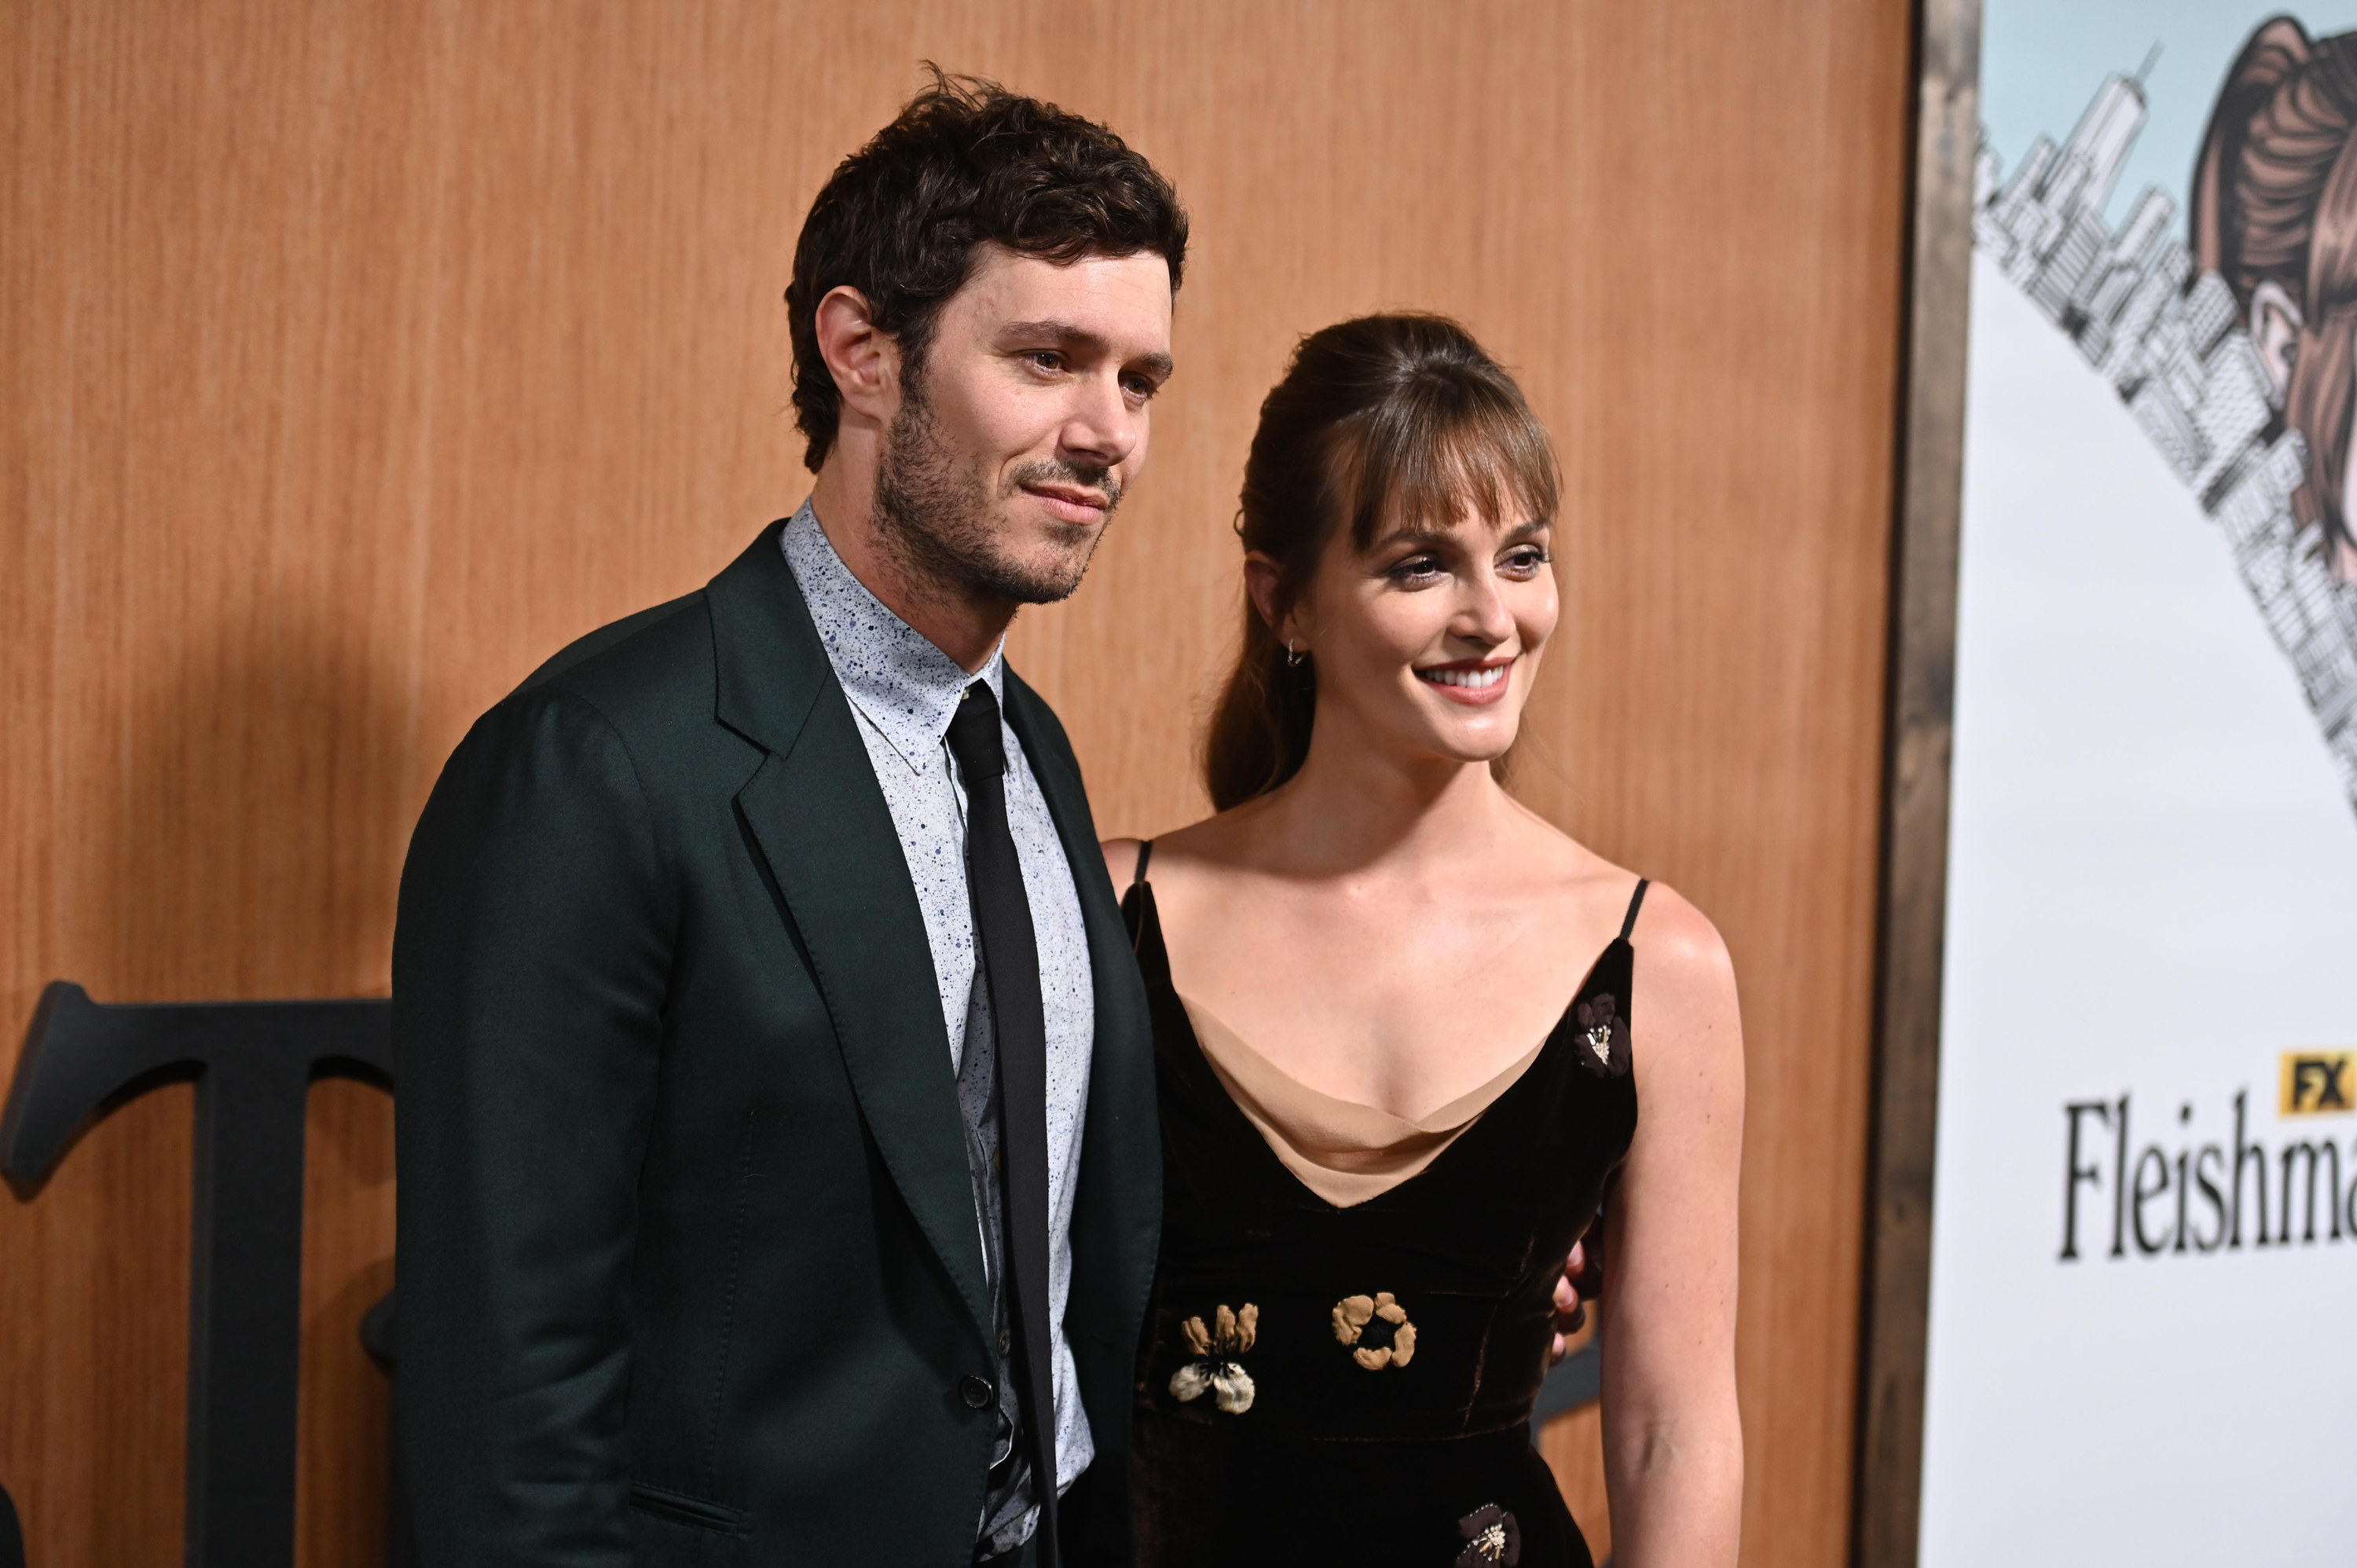 Adam Brody and Leighton Meester on the red carpet